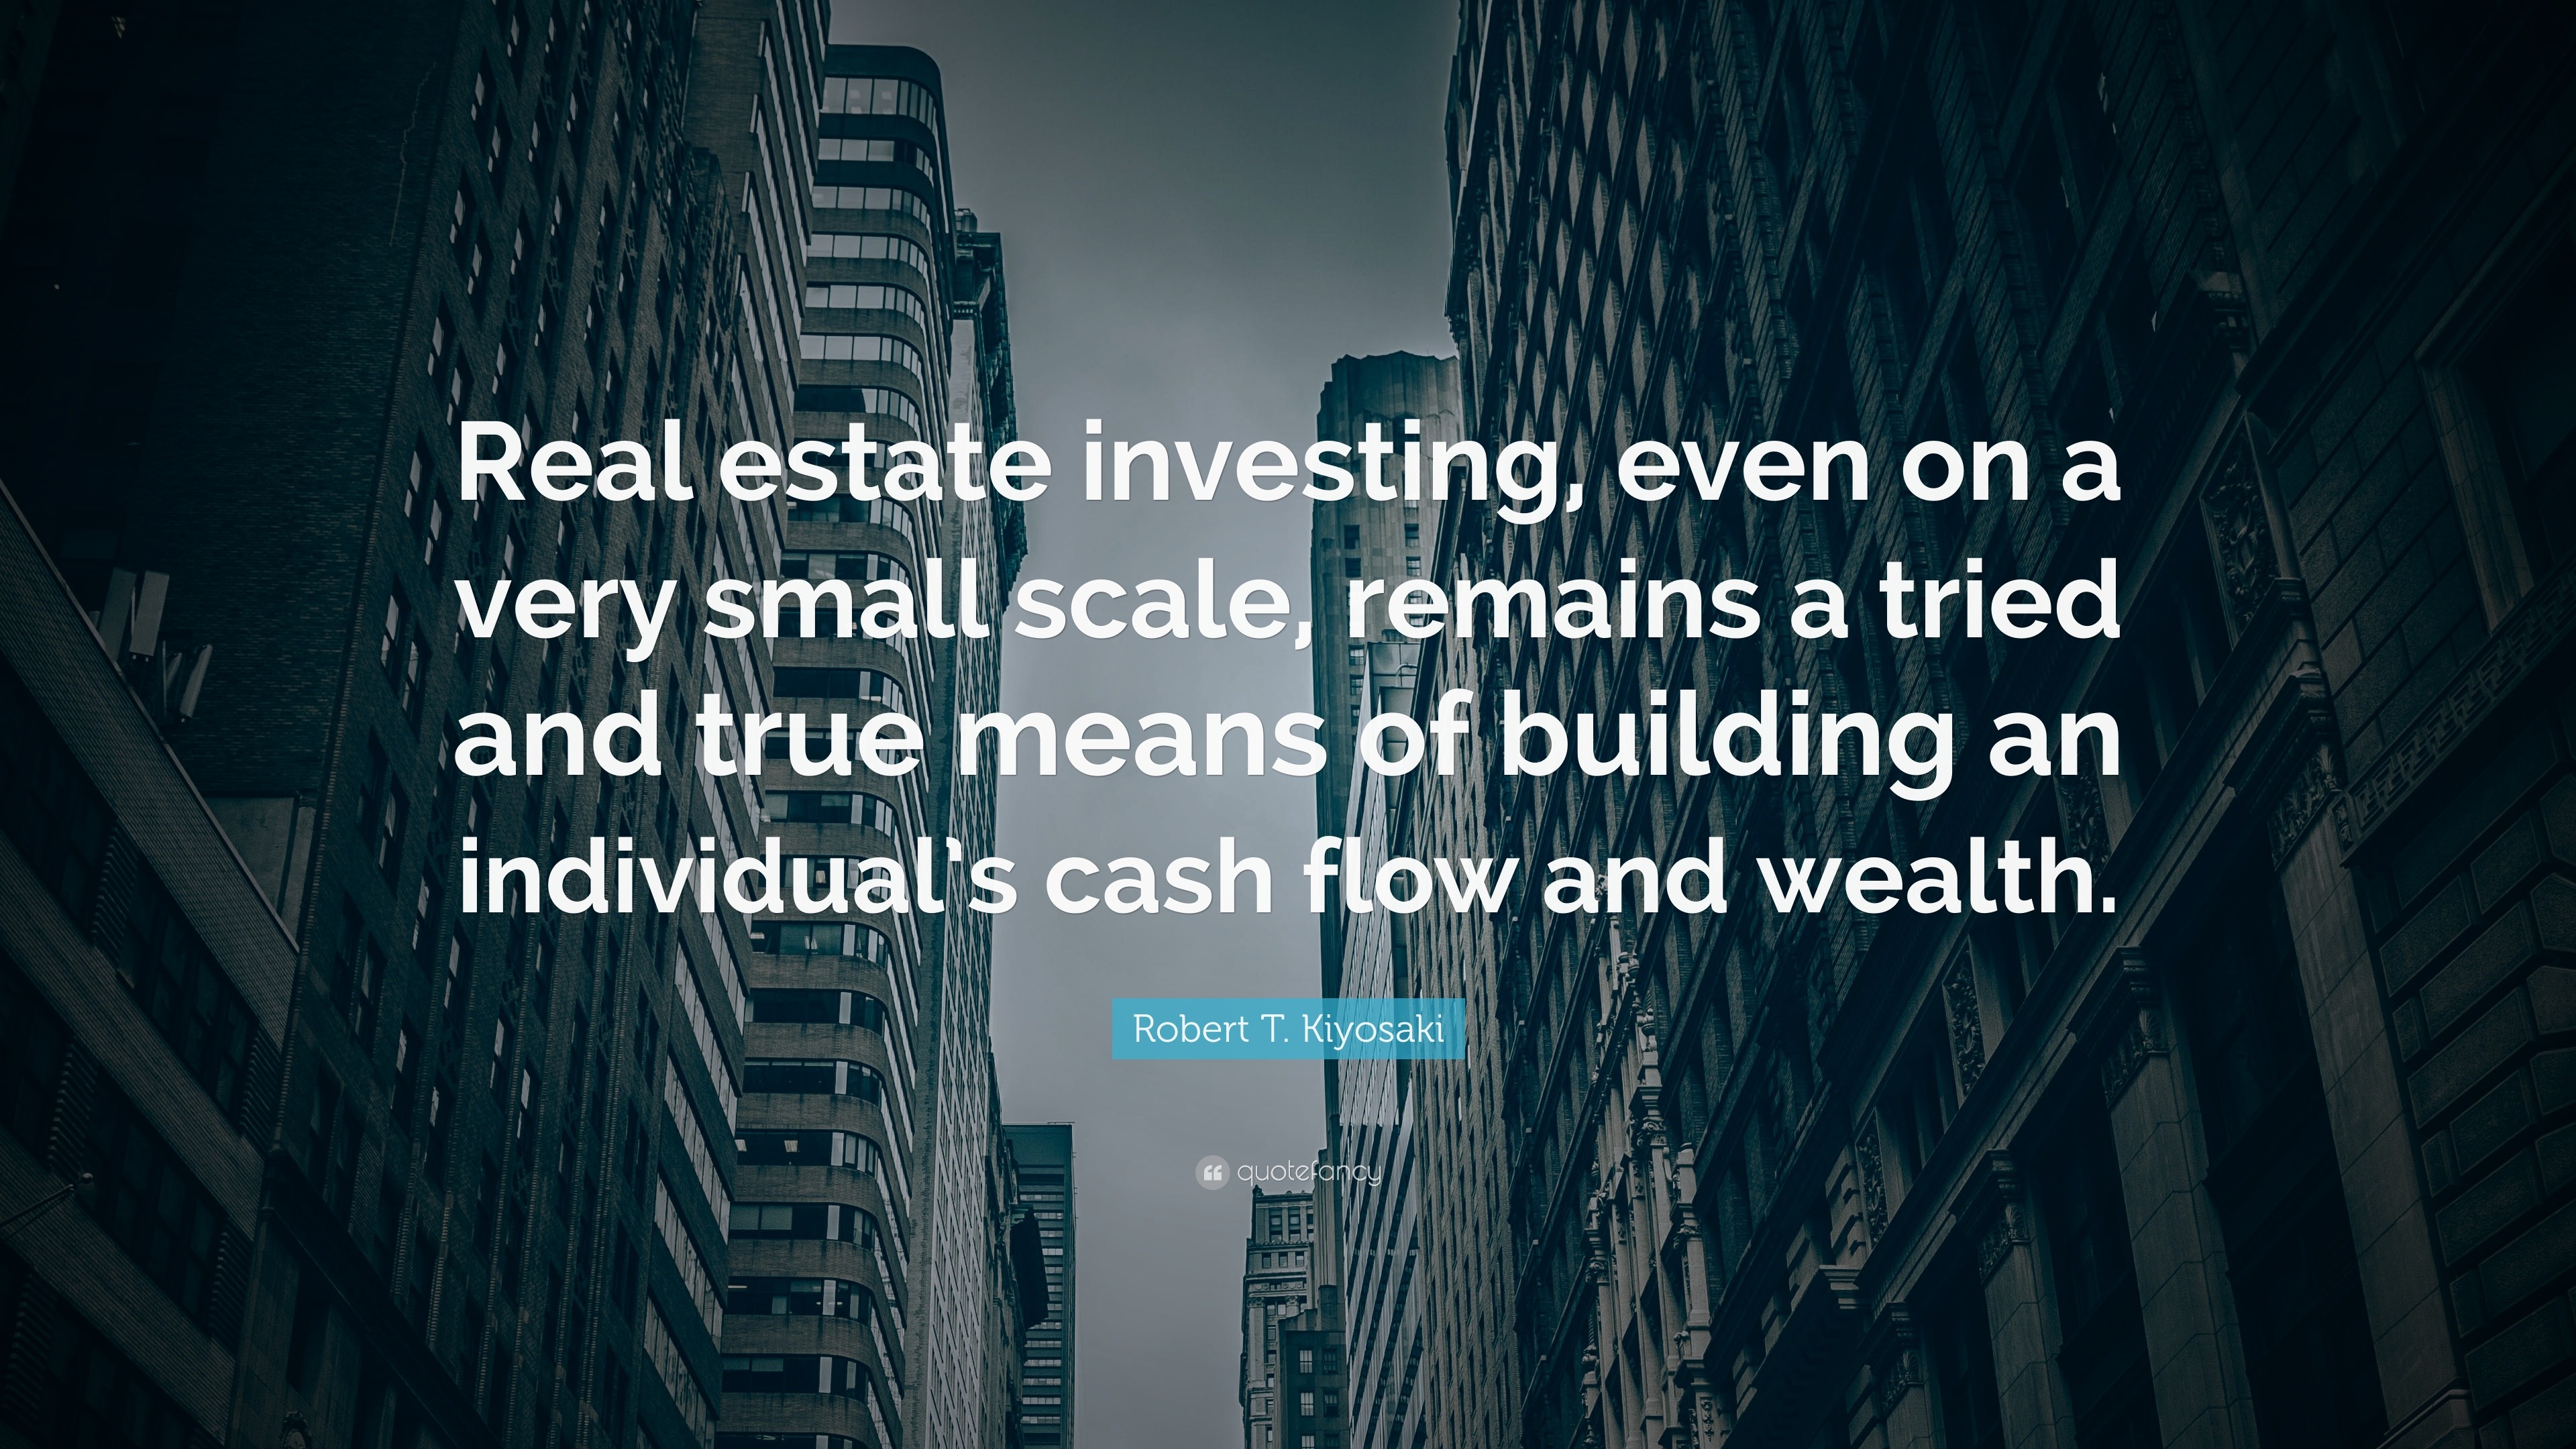 112 Uplifting Real Estate Quotes That Will Inspire You to Be Grow This Year